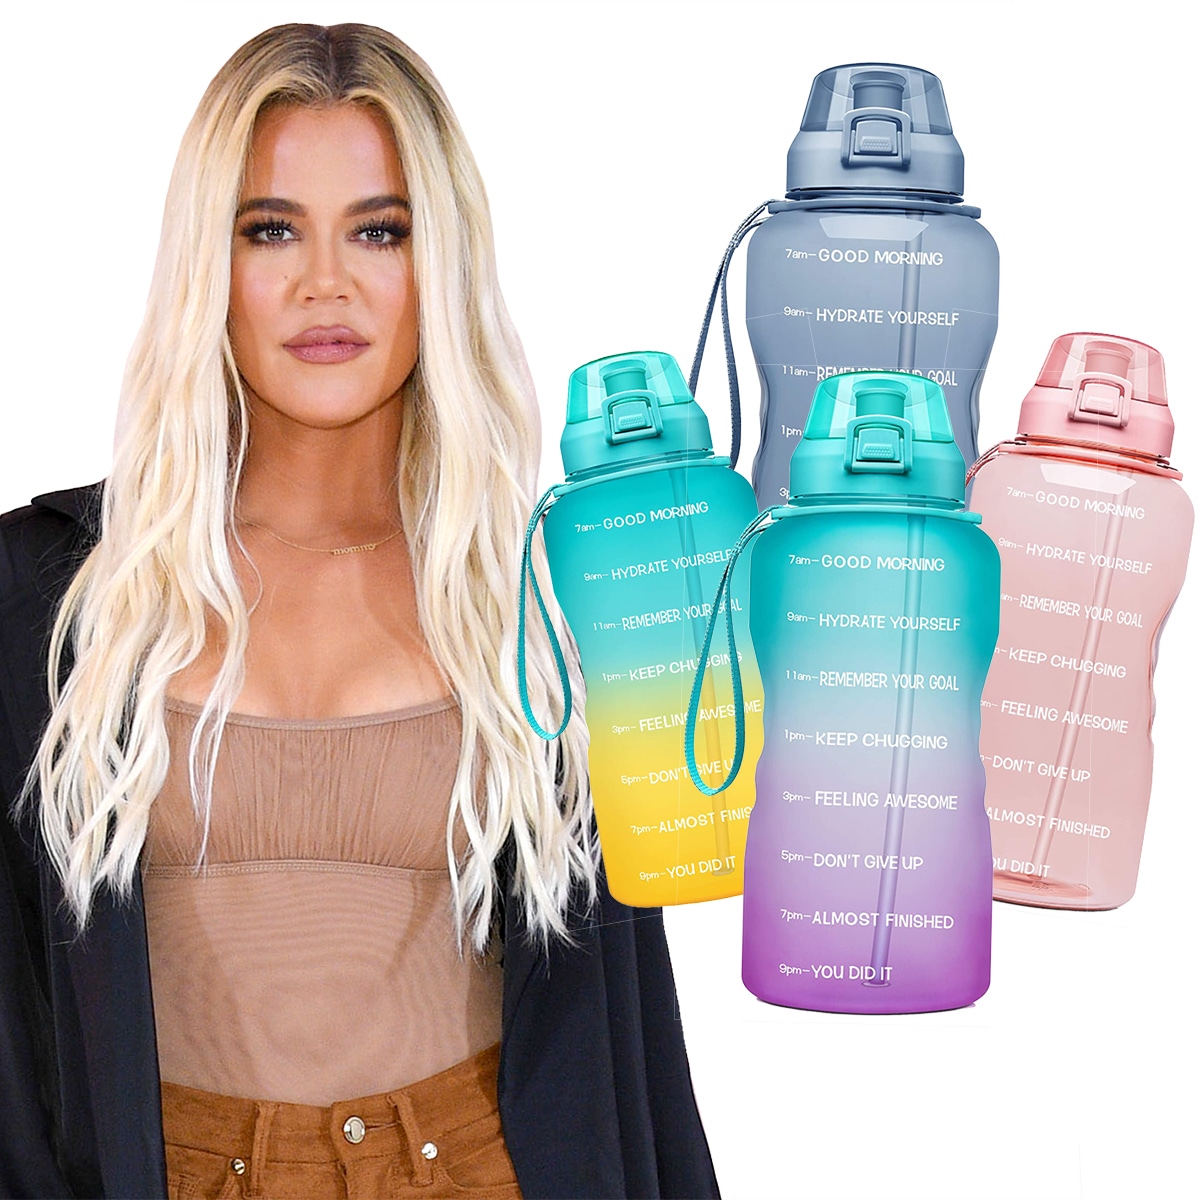 https://akns-images.eonline.com/eol_images/Entire_Site/2022024/rs_1200x1200-220124102235-1200-Ecomm-Khloe-Water-Bottle.jpg?fit=around%7C1200:1200&output-quality=90&crop=1200:1200;center,top